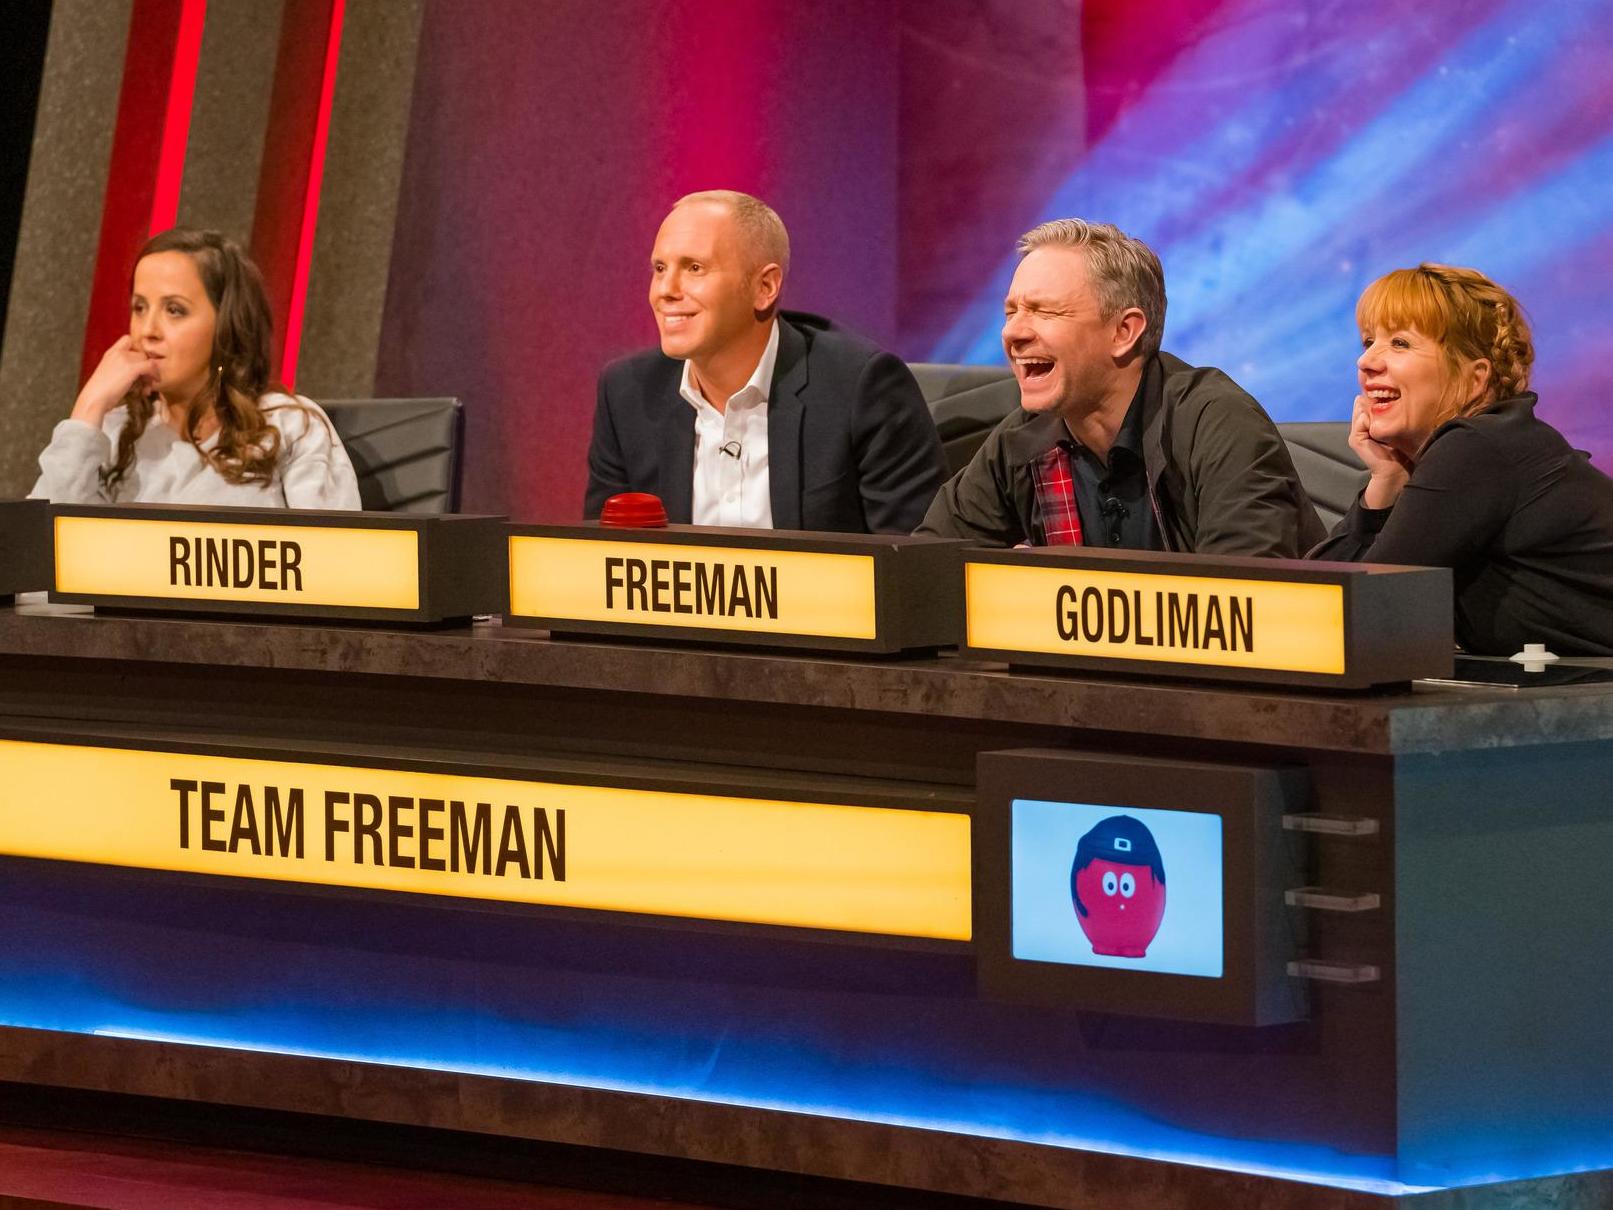 Kerry Godliman, right, with Luisa Omielan, Robert Rinder and Martin Freeman on ‘Comic Relief Does University Challenge’